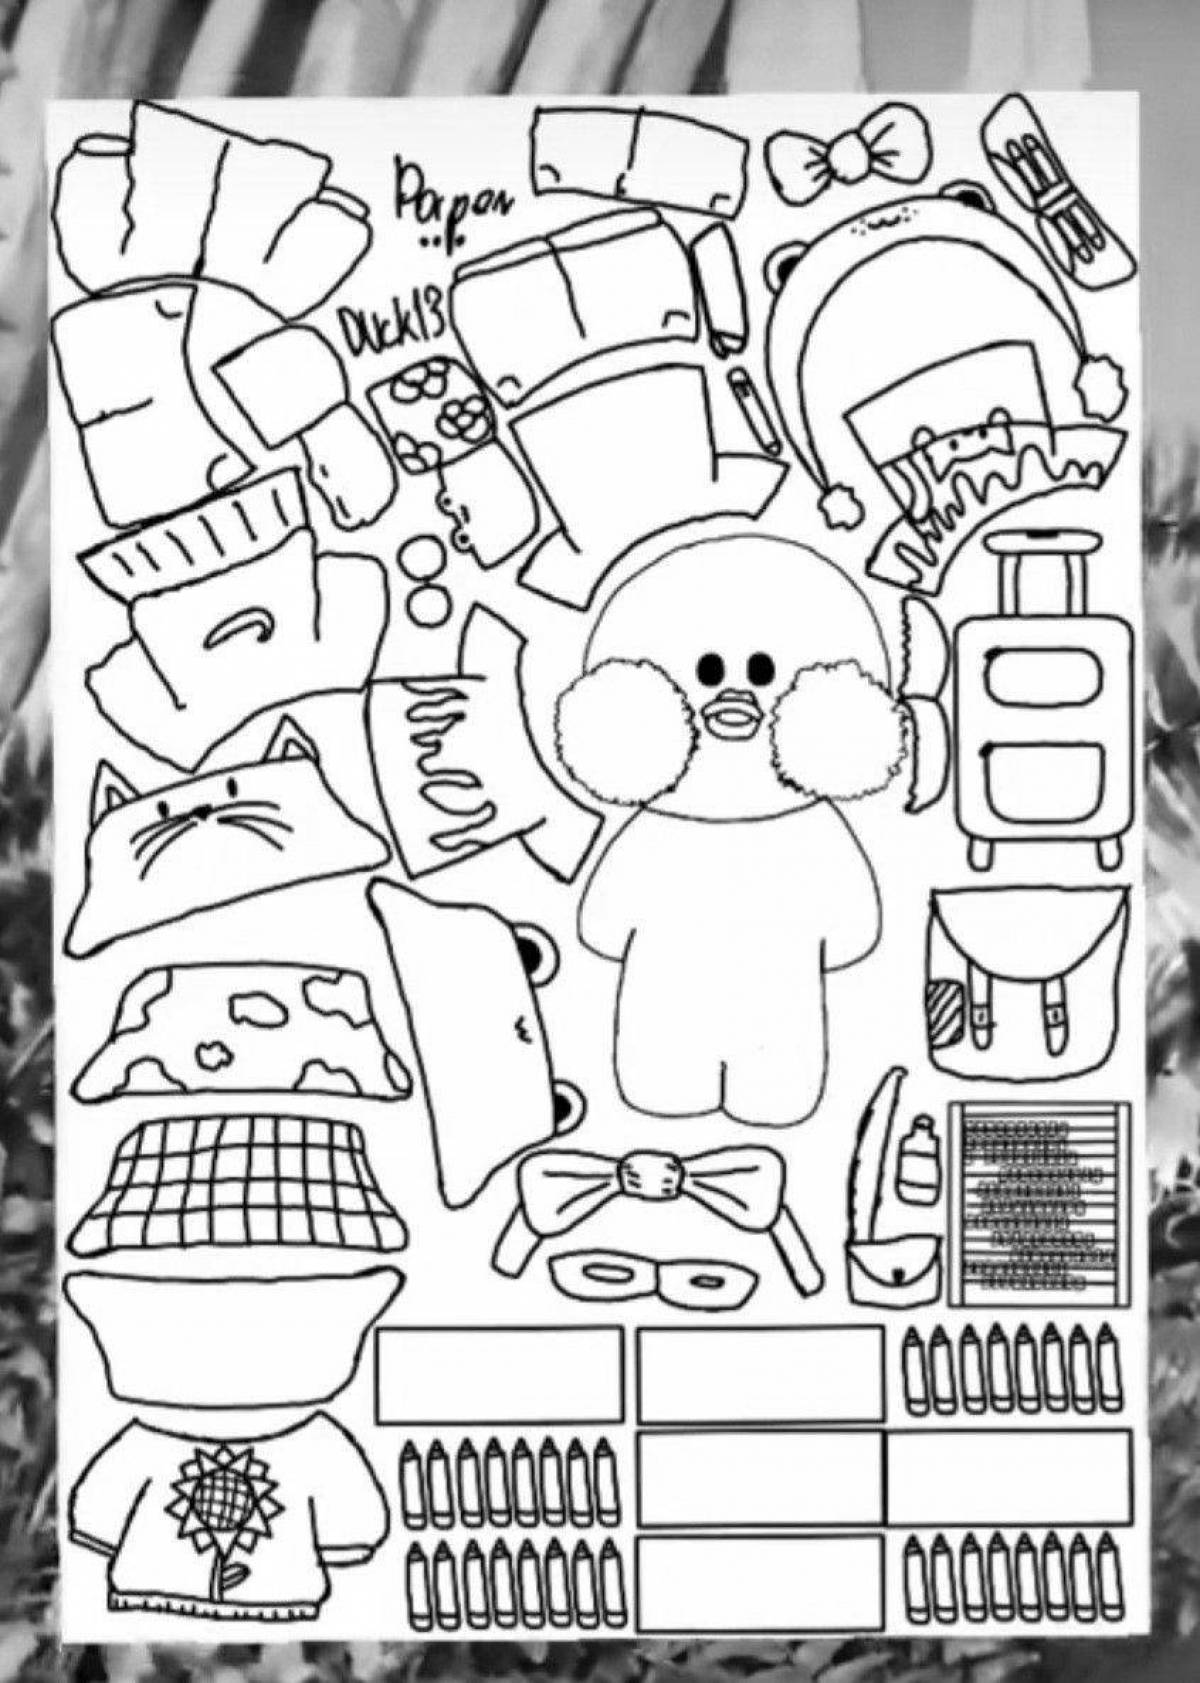 Lalafanfan awesome duck coloring page